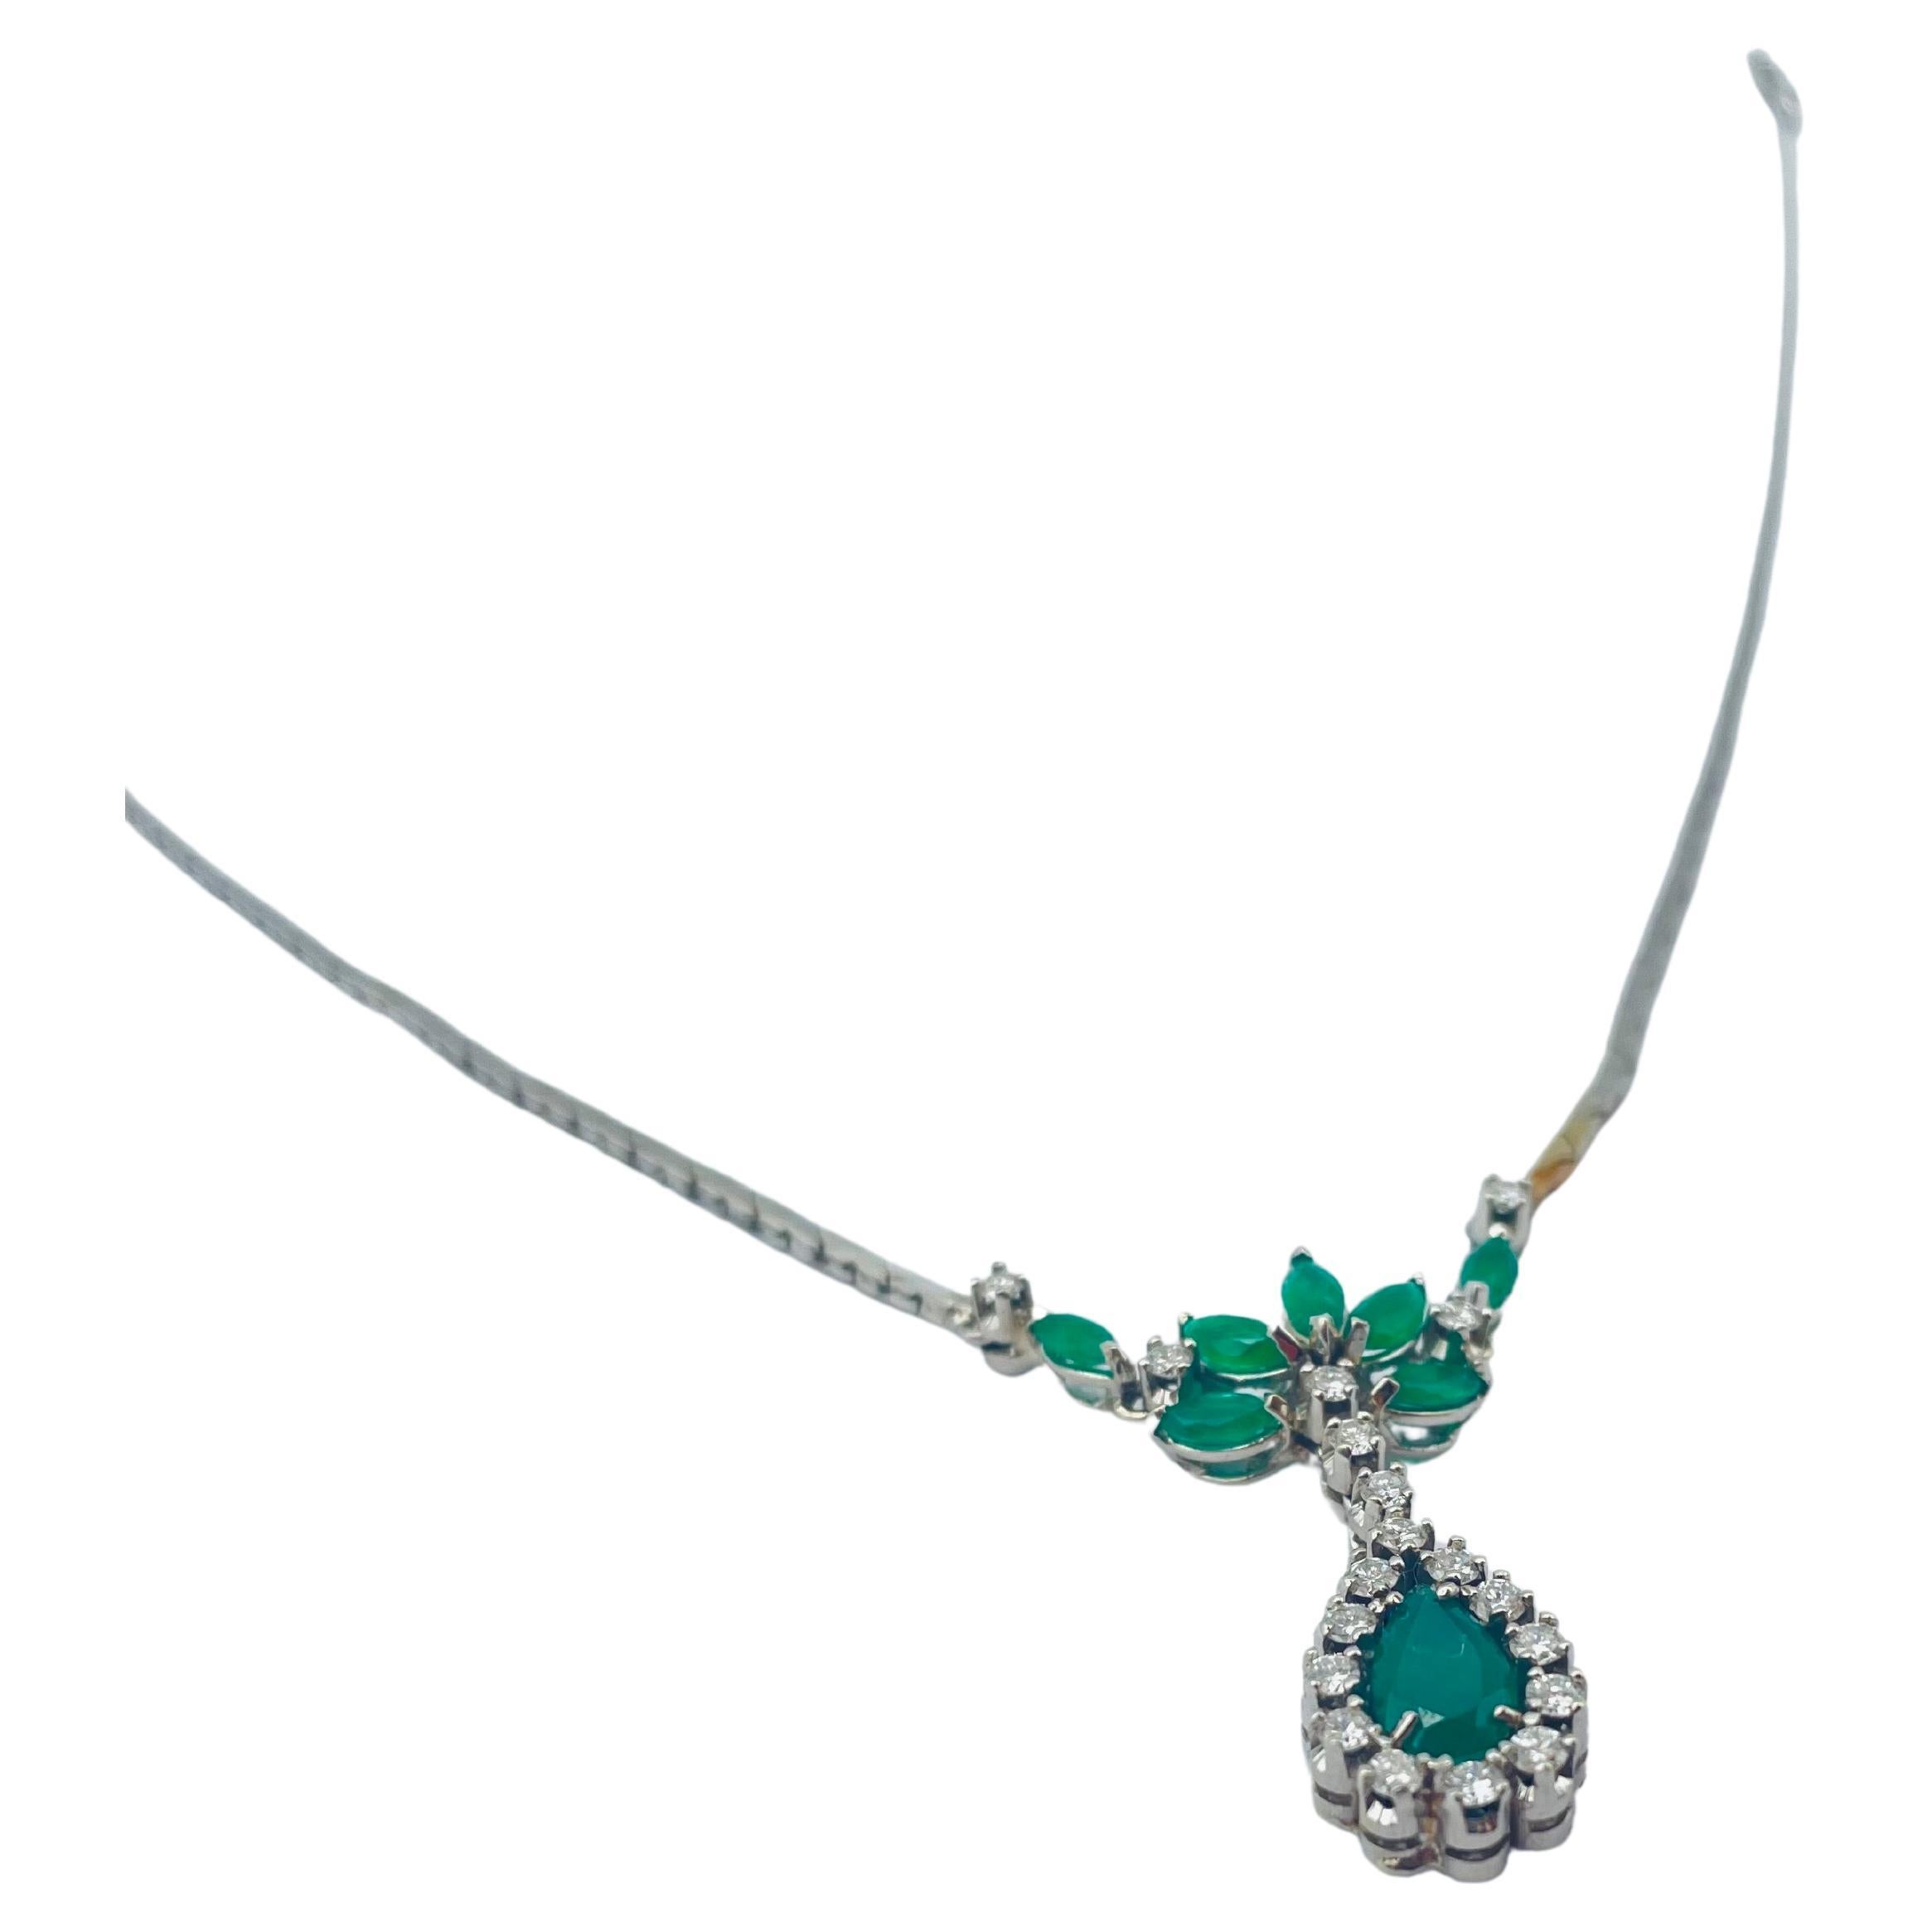 Art deco style dreamfull necklace with emeralds and diamonds